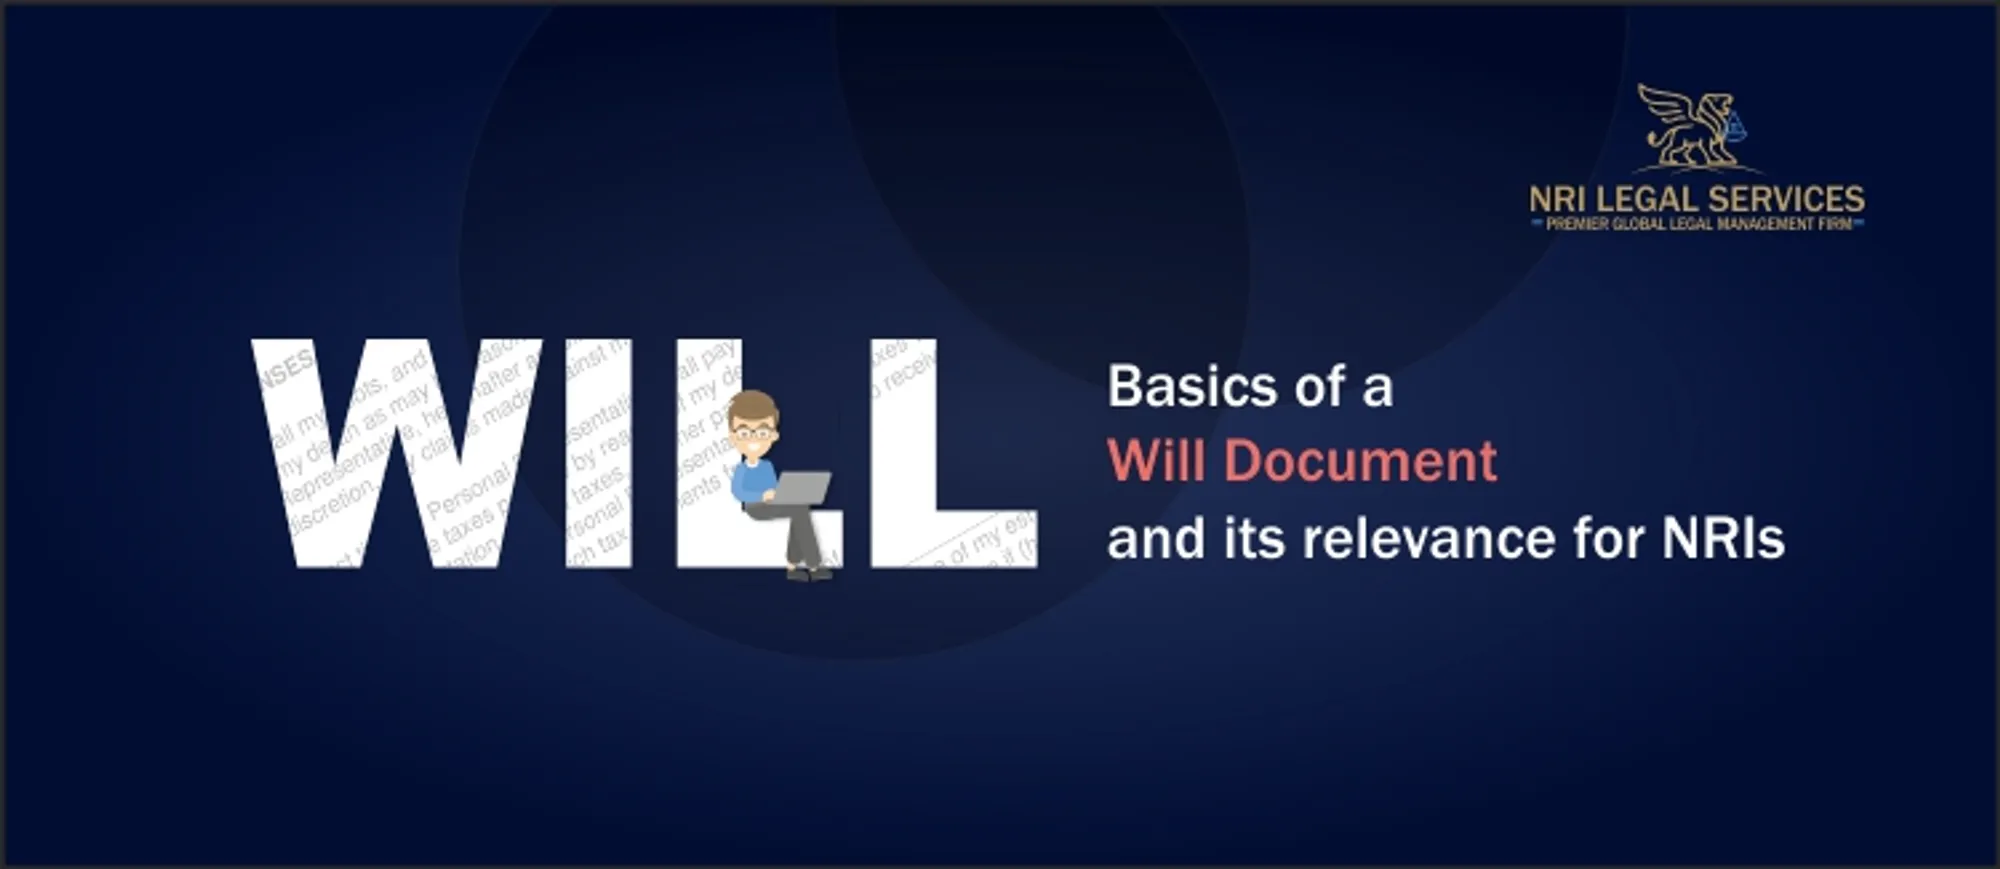 Basics of a Will Document and its relevance for NRIs